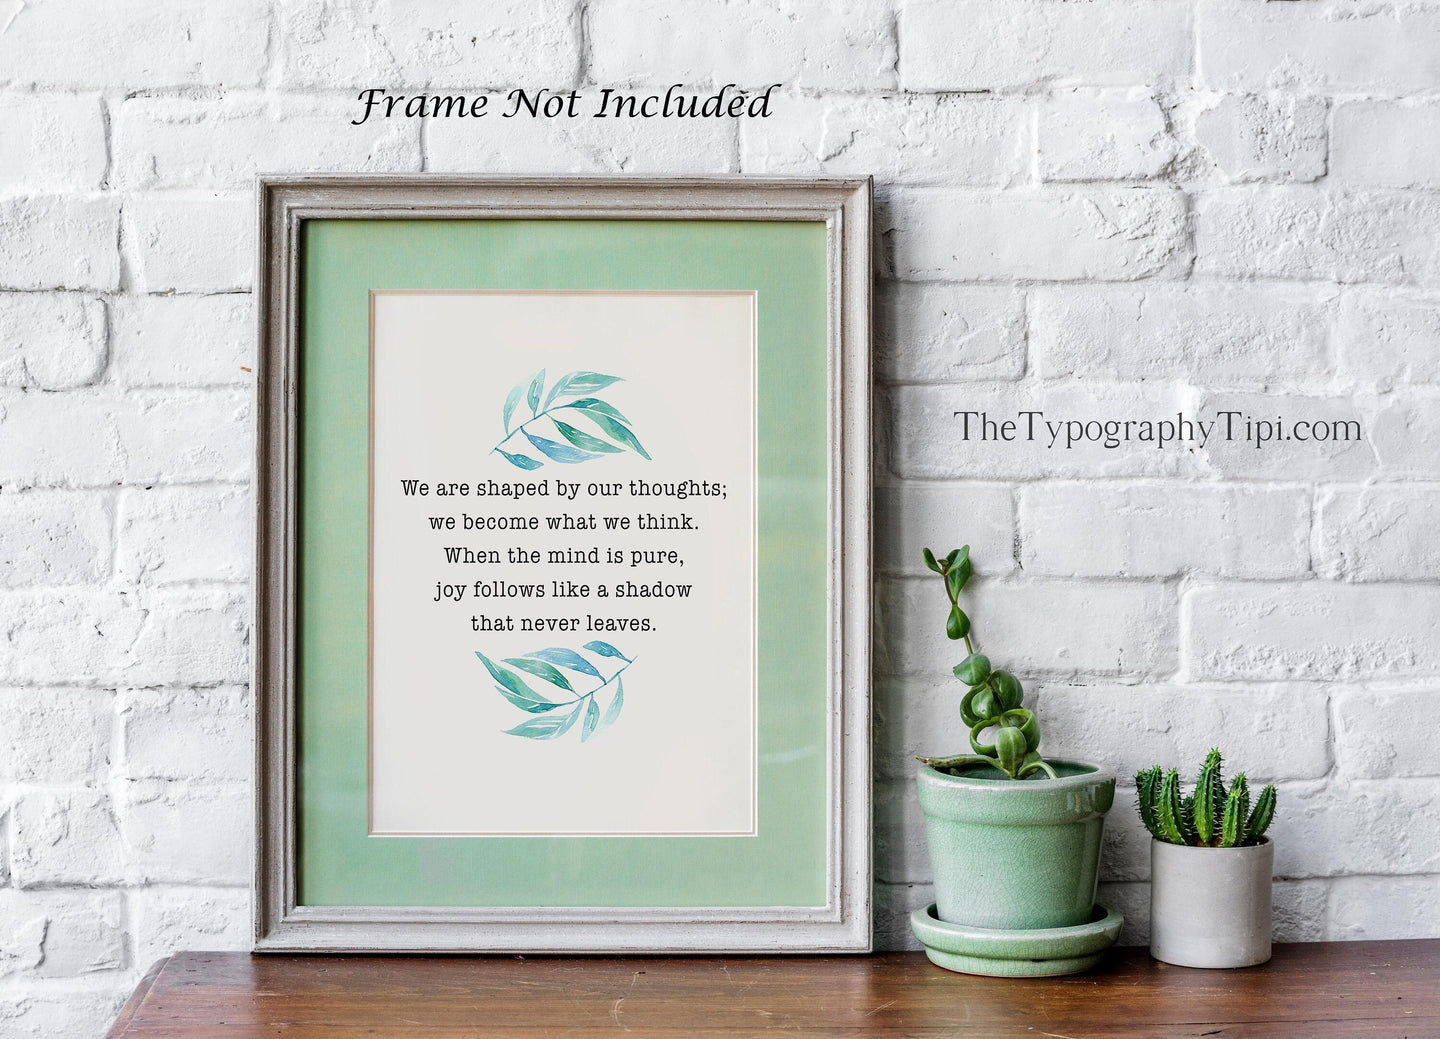 Buddha quote Poster Print - We are shaped by our thoughts, joy follows like a shadow - Inspirational Print